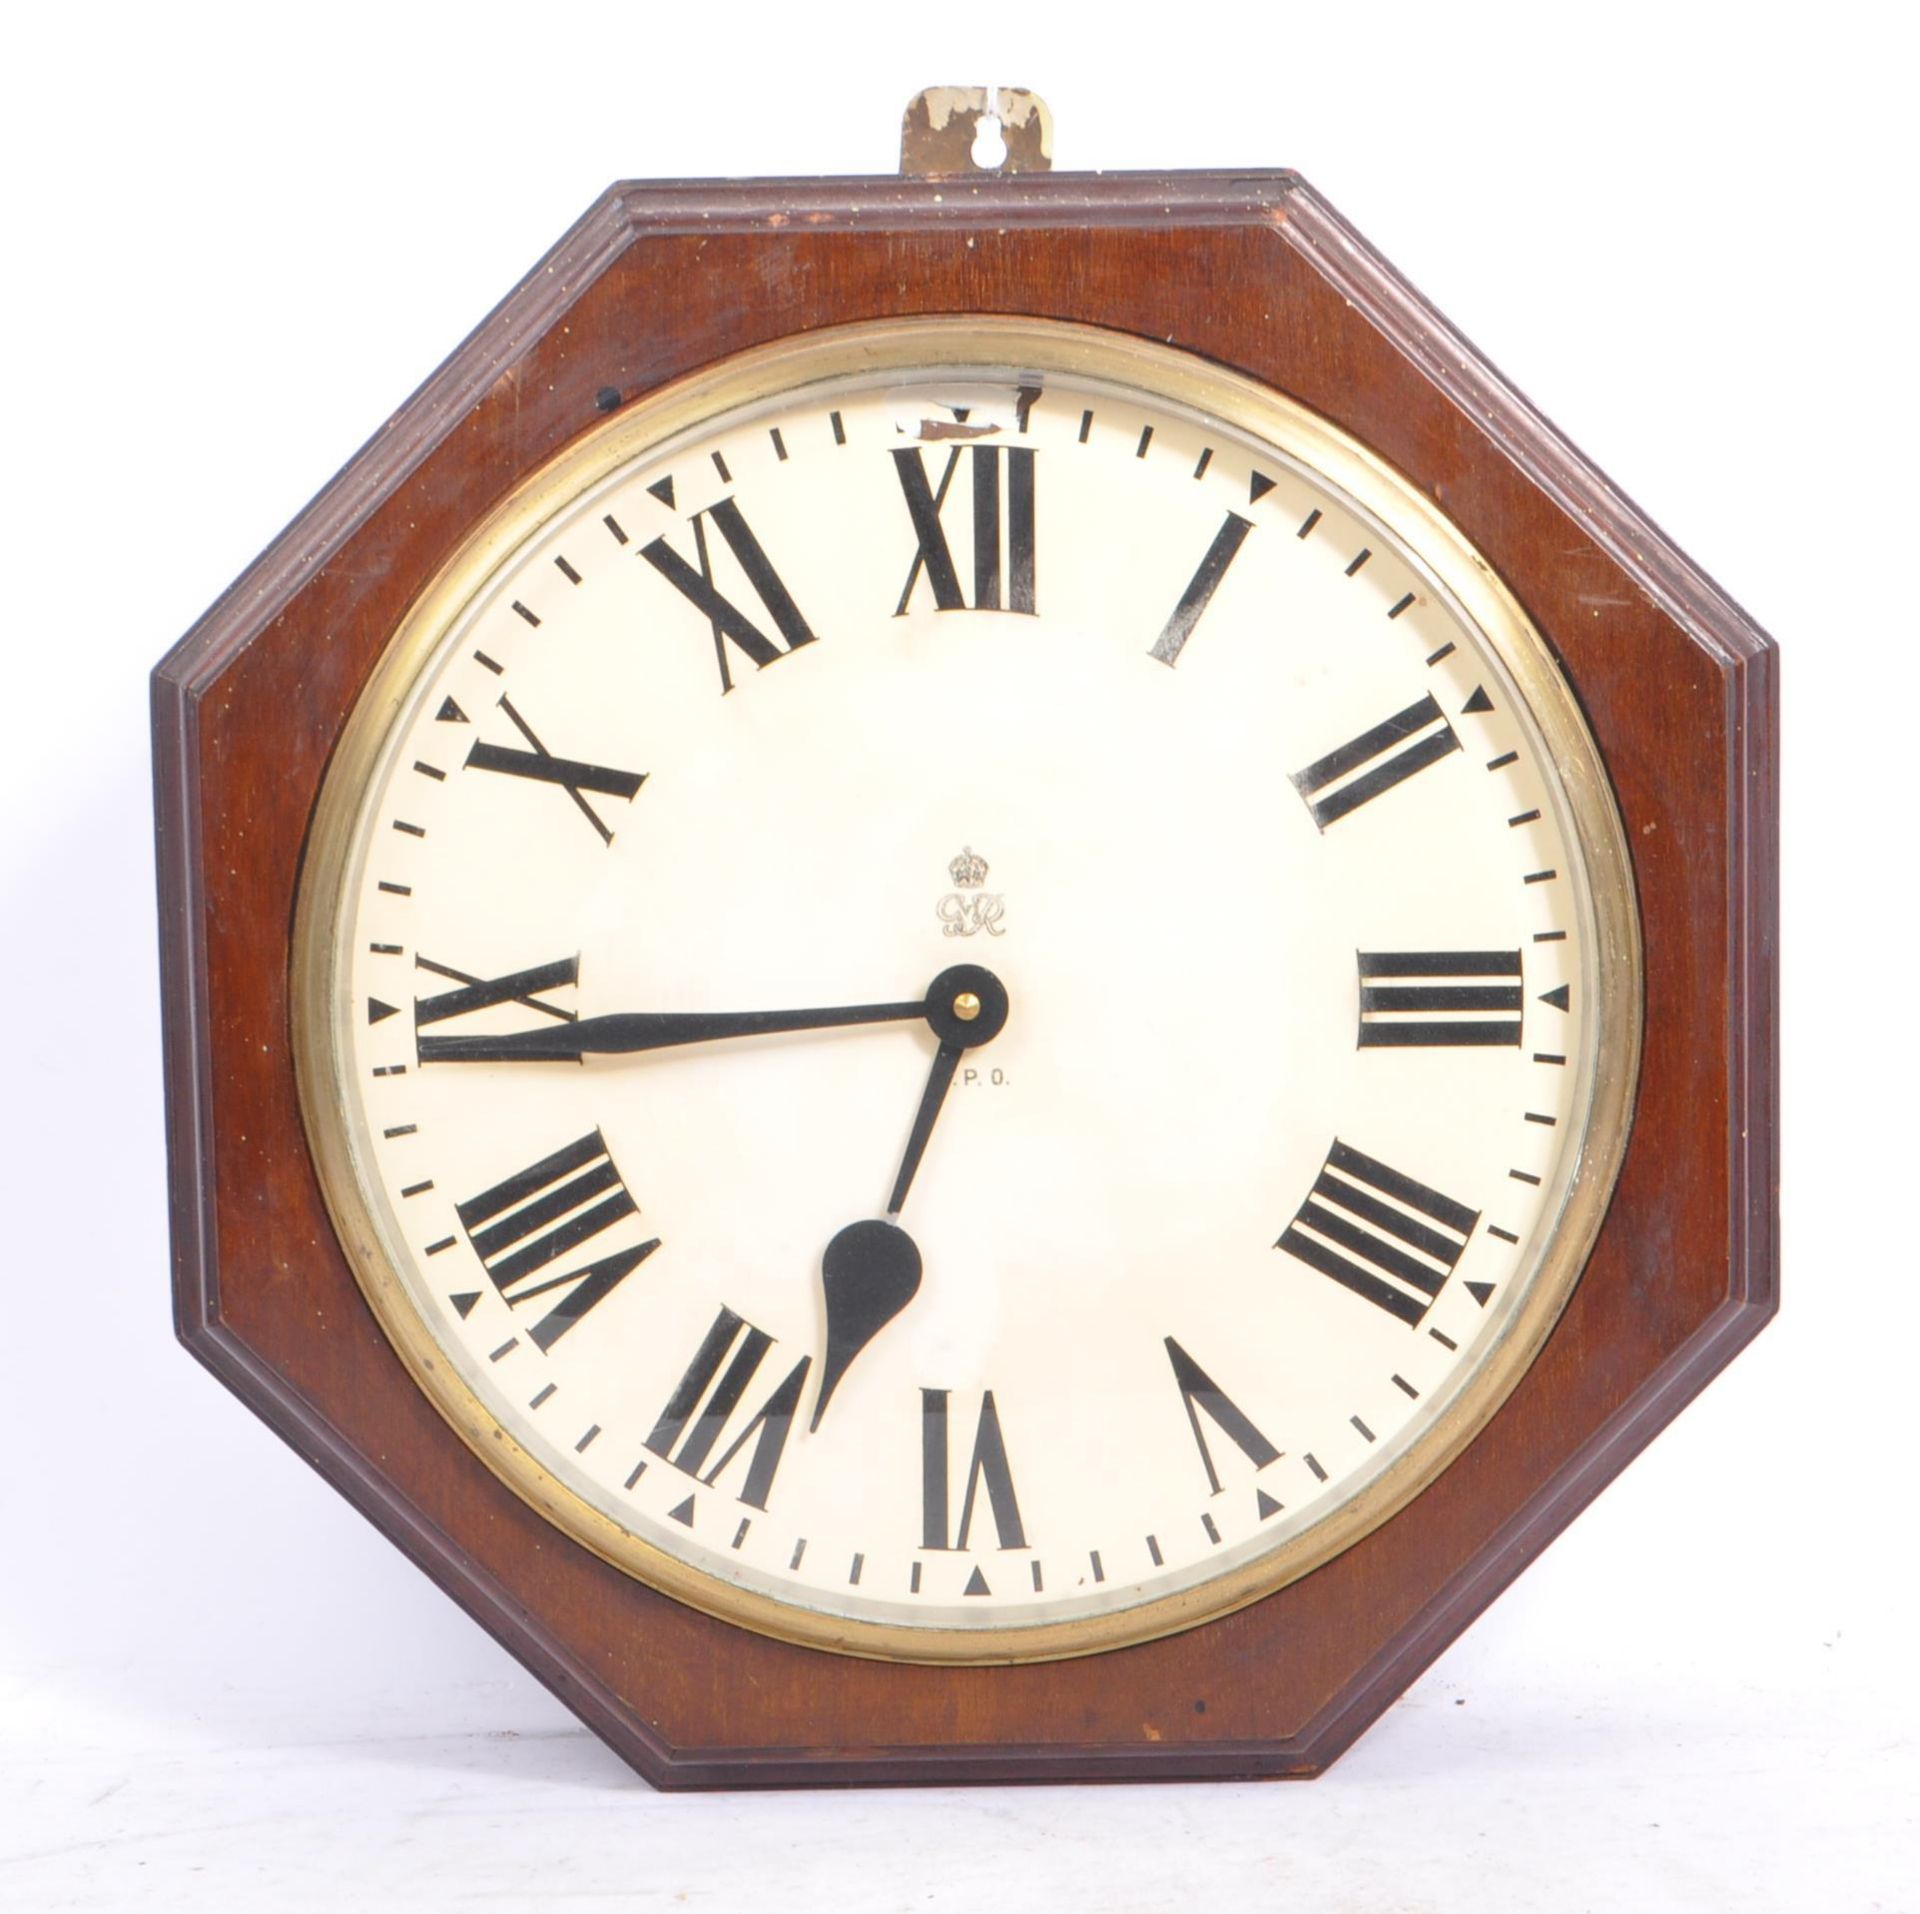 EARLY 20TH CENTURY POST OFFICE GEORGE VI CLOCK